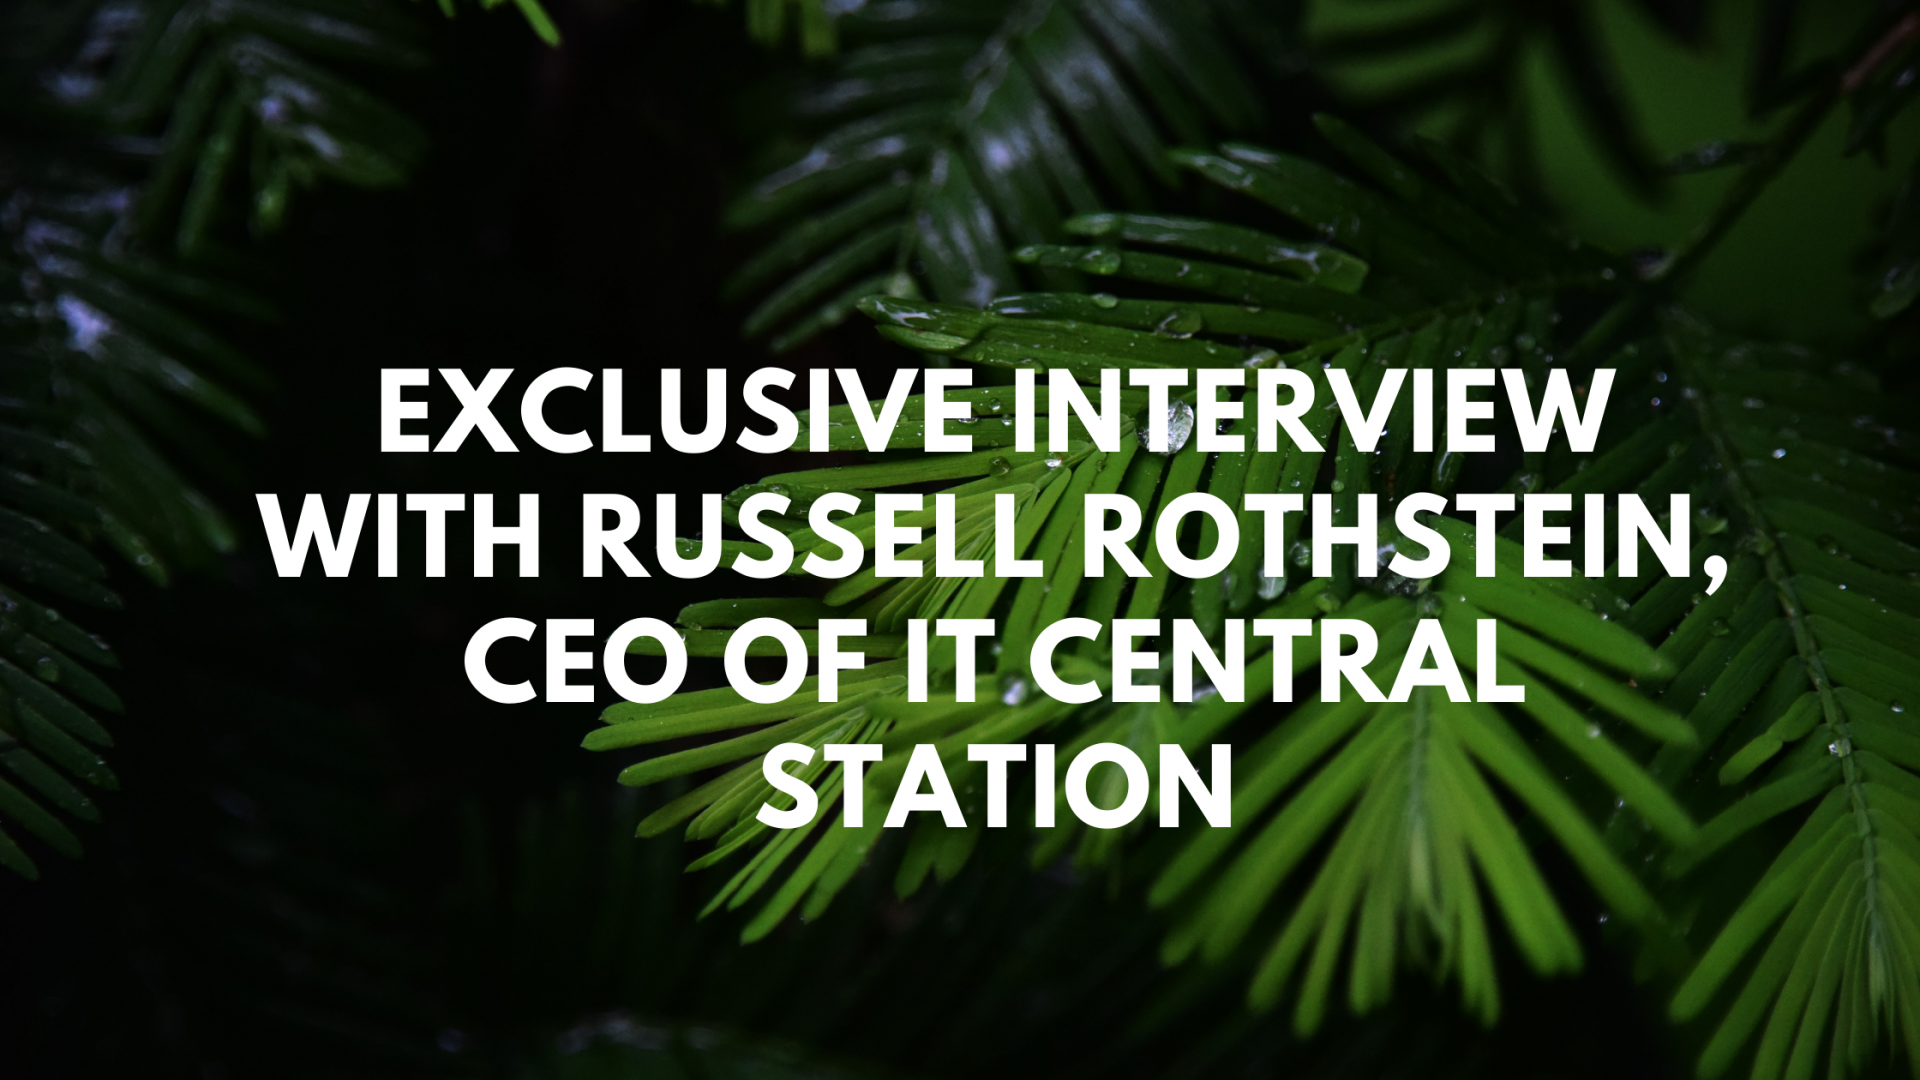 Exclusive Interview With Russell Rothstein CEO of IT Central Station